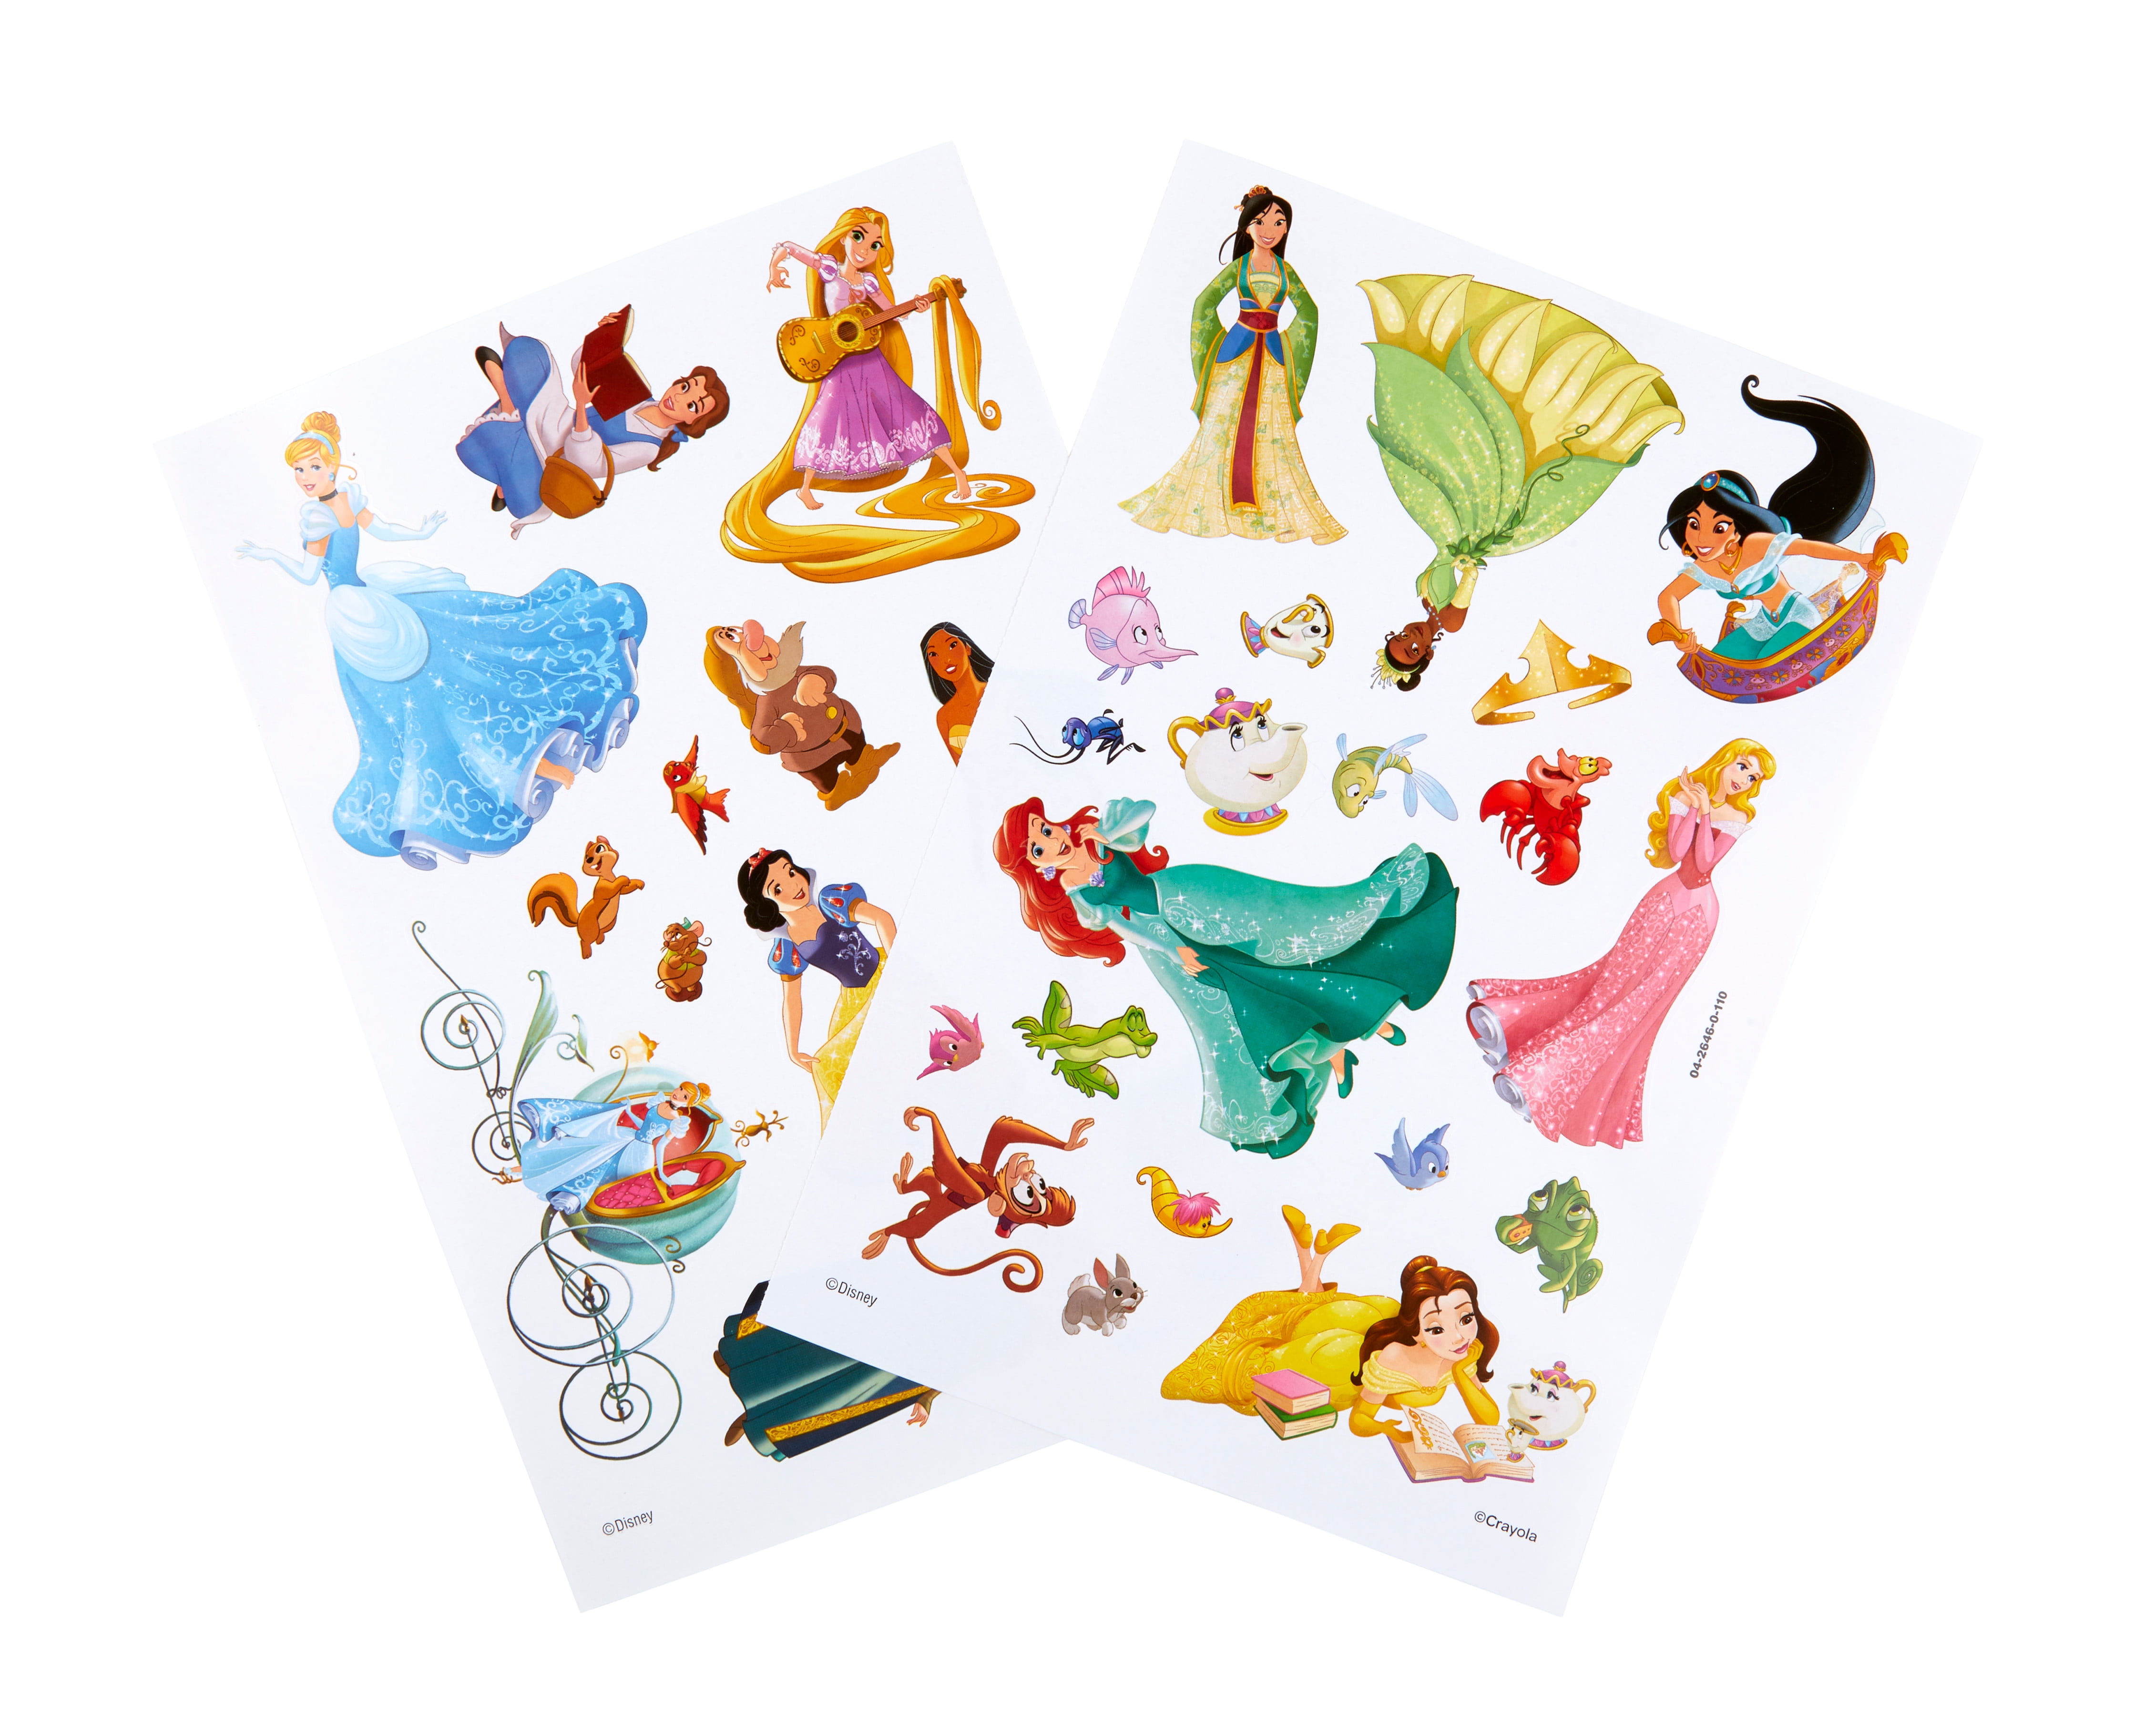 Disney Princess Coloring and Activity Book Ultimate Bundle - 3 Pack Disney  Princess Arts and Crafts Set with Stickers, Painting Supplies, and More